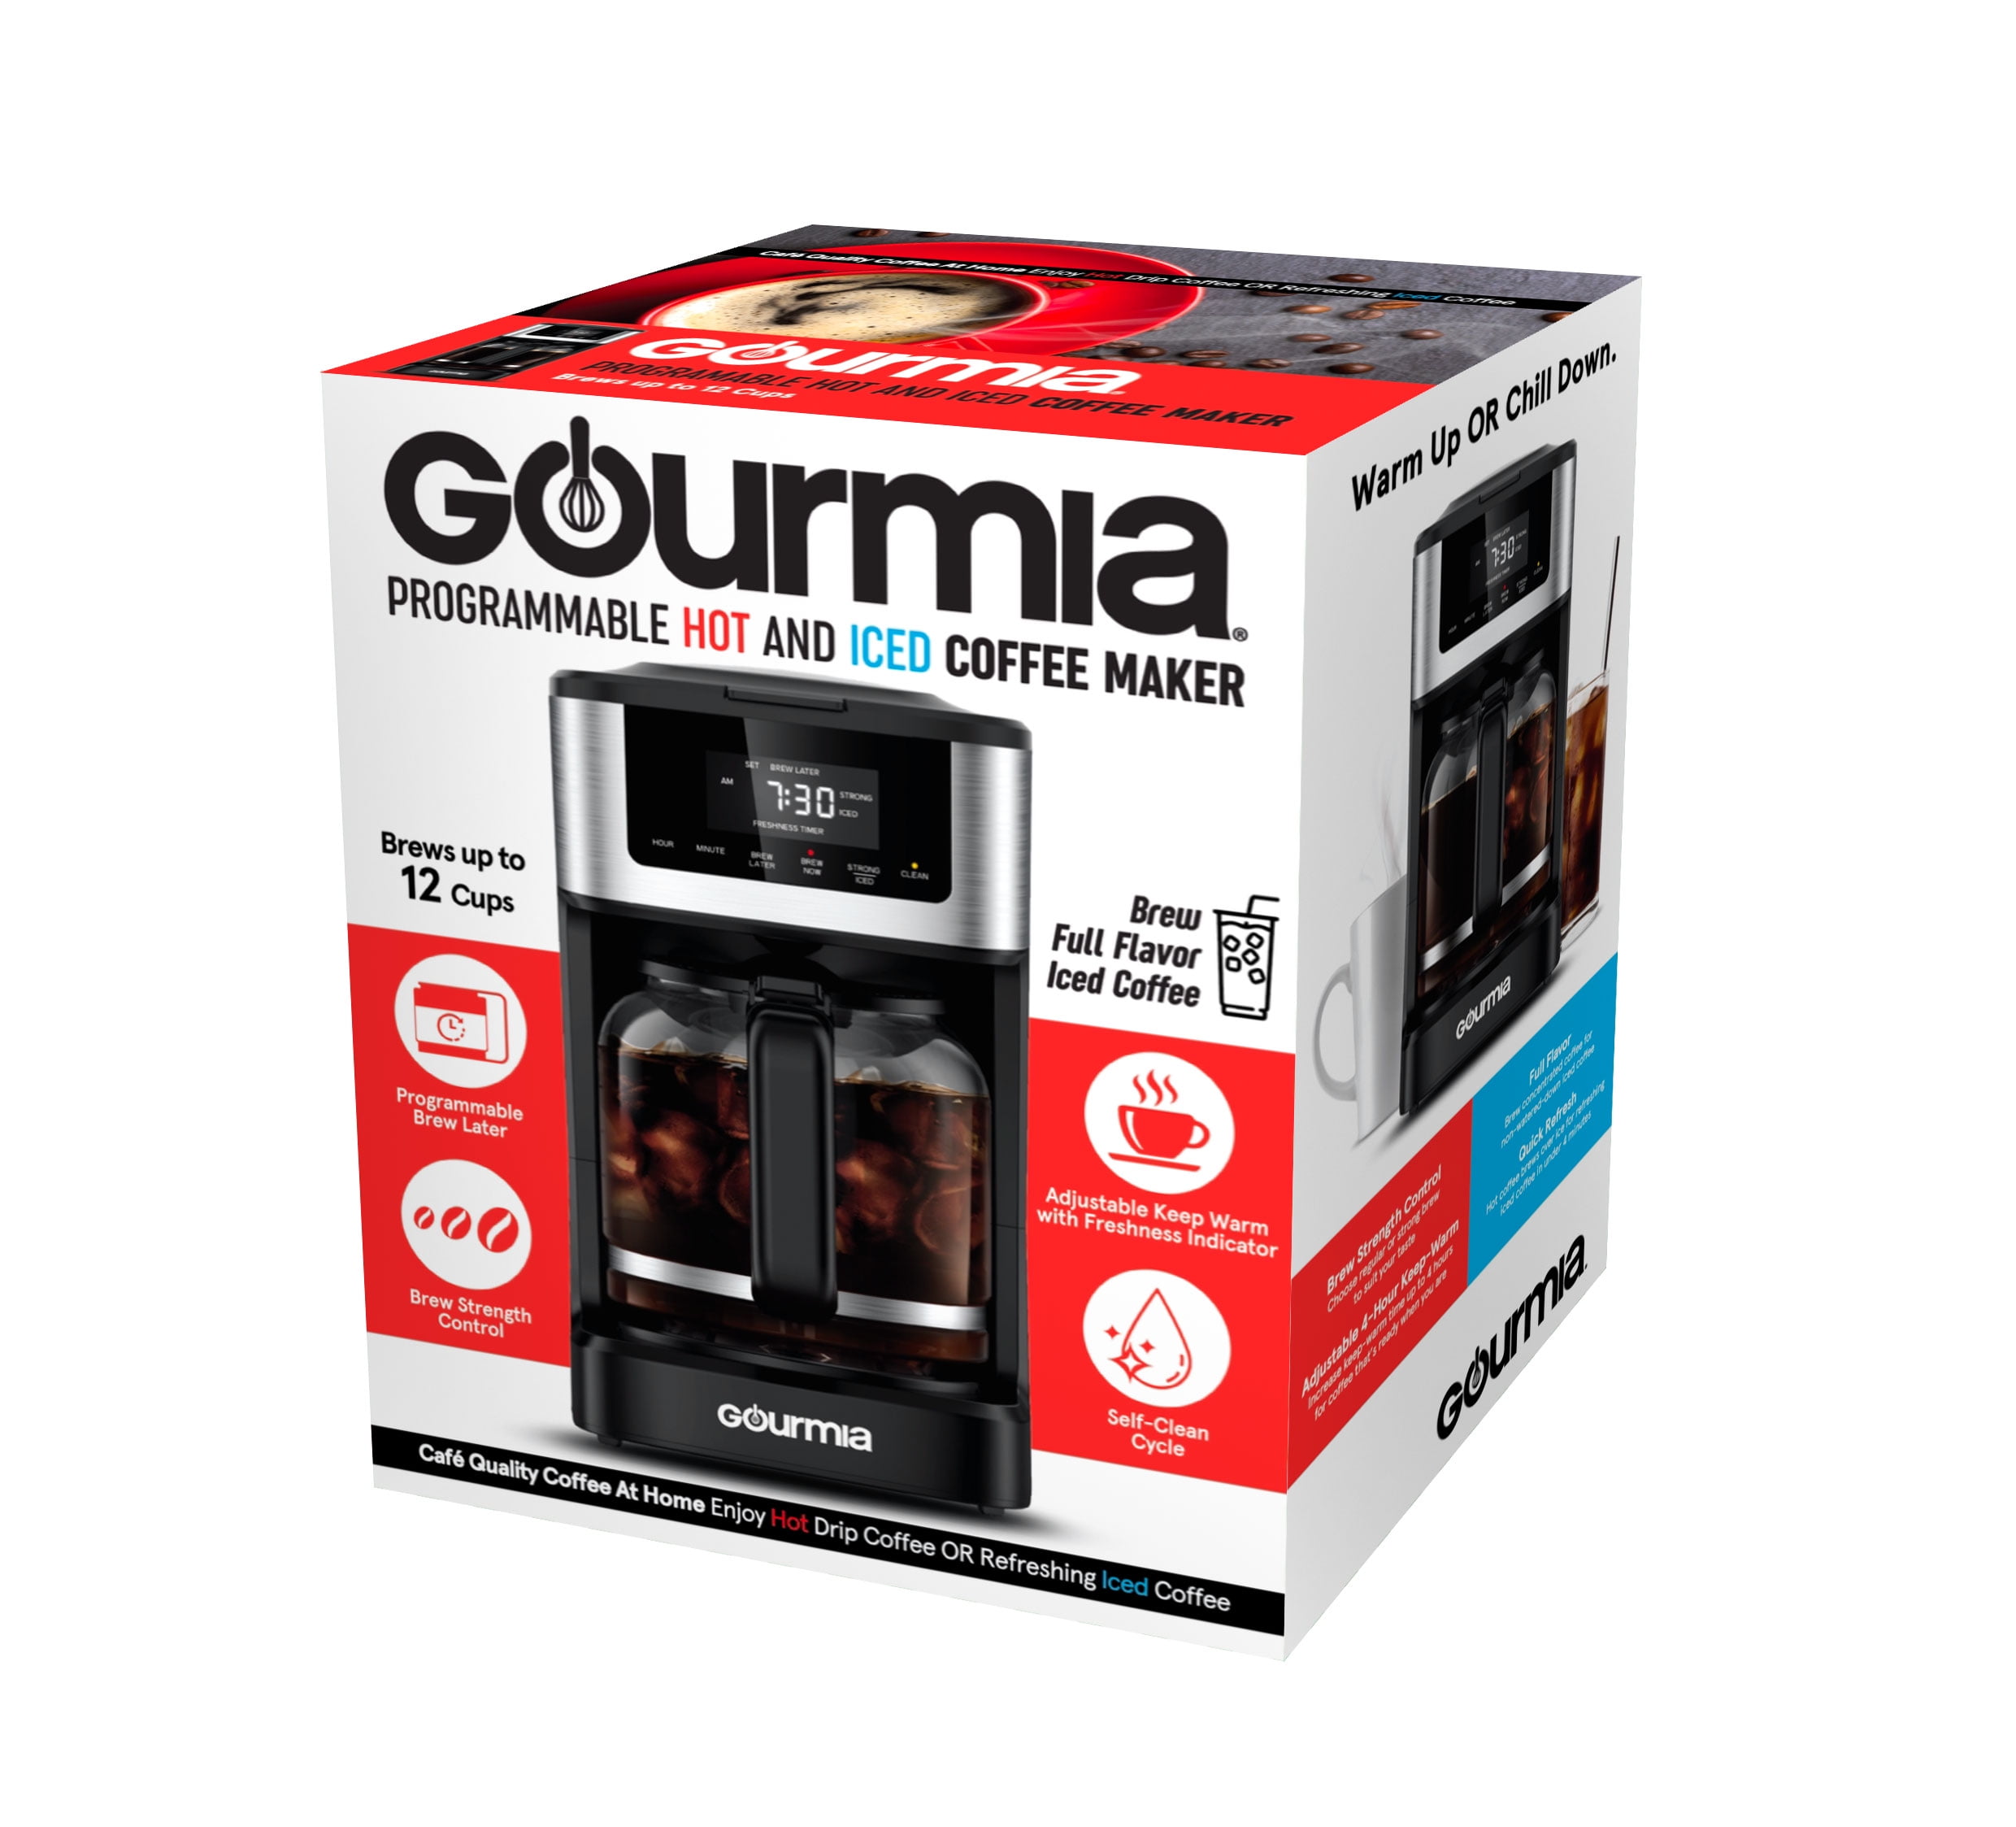 Gourmia 12 Cup One-touch Switch Coffee Maker With Auto Keep Warm